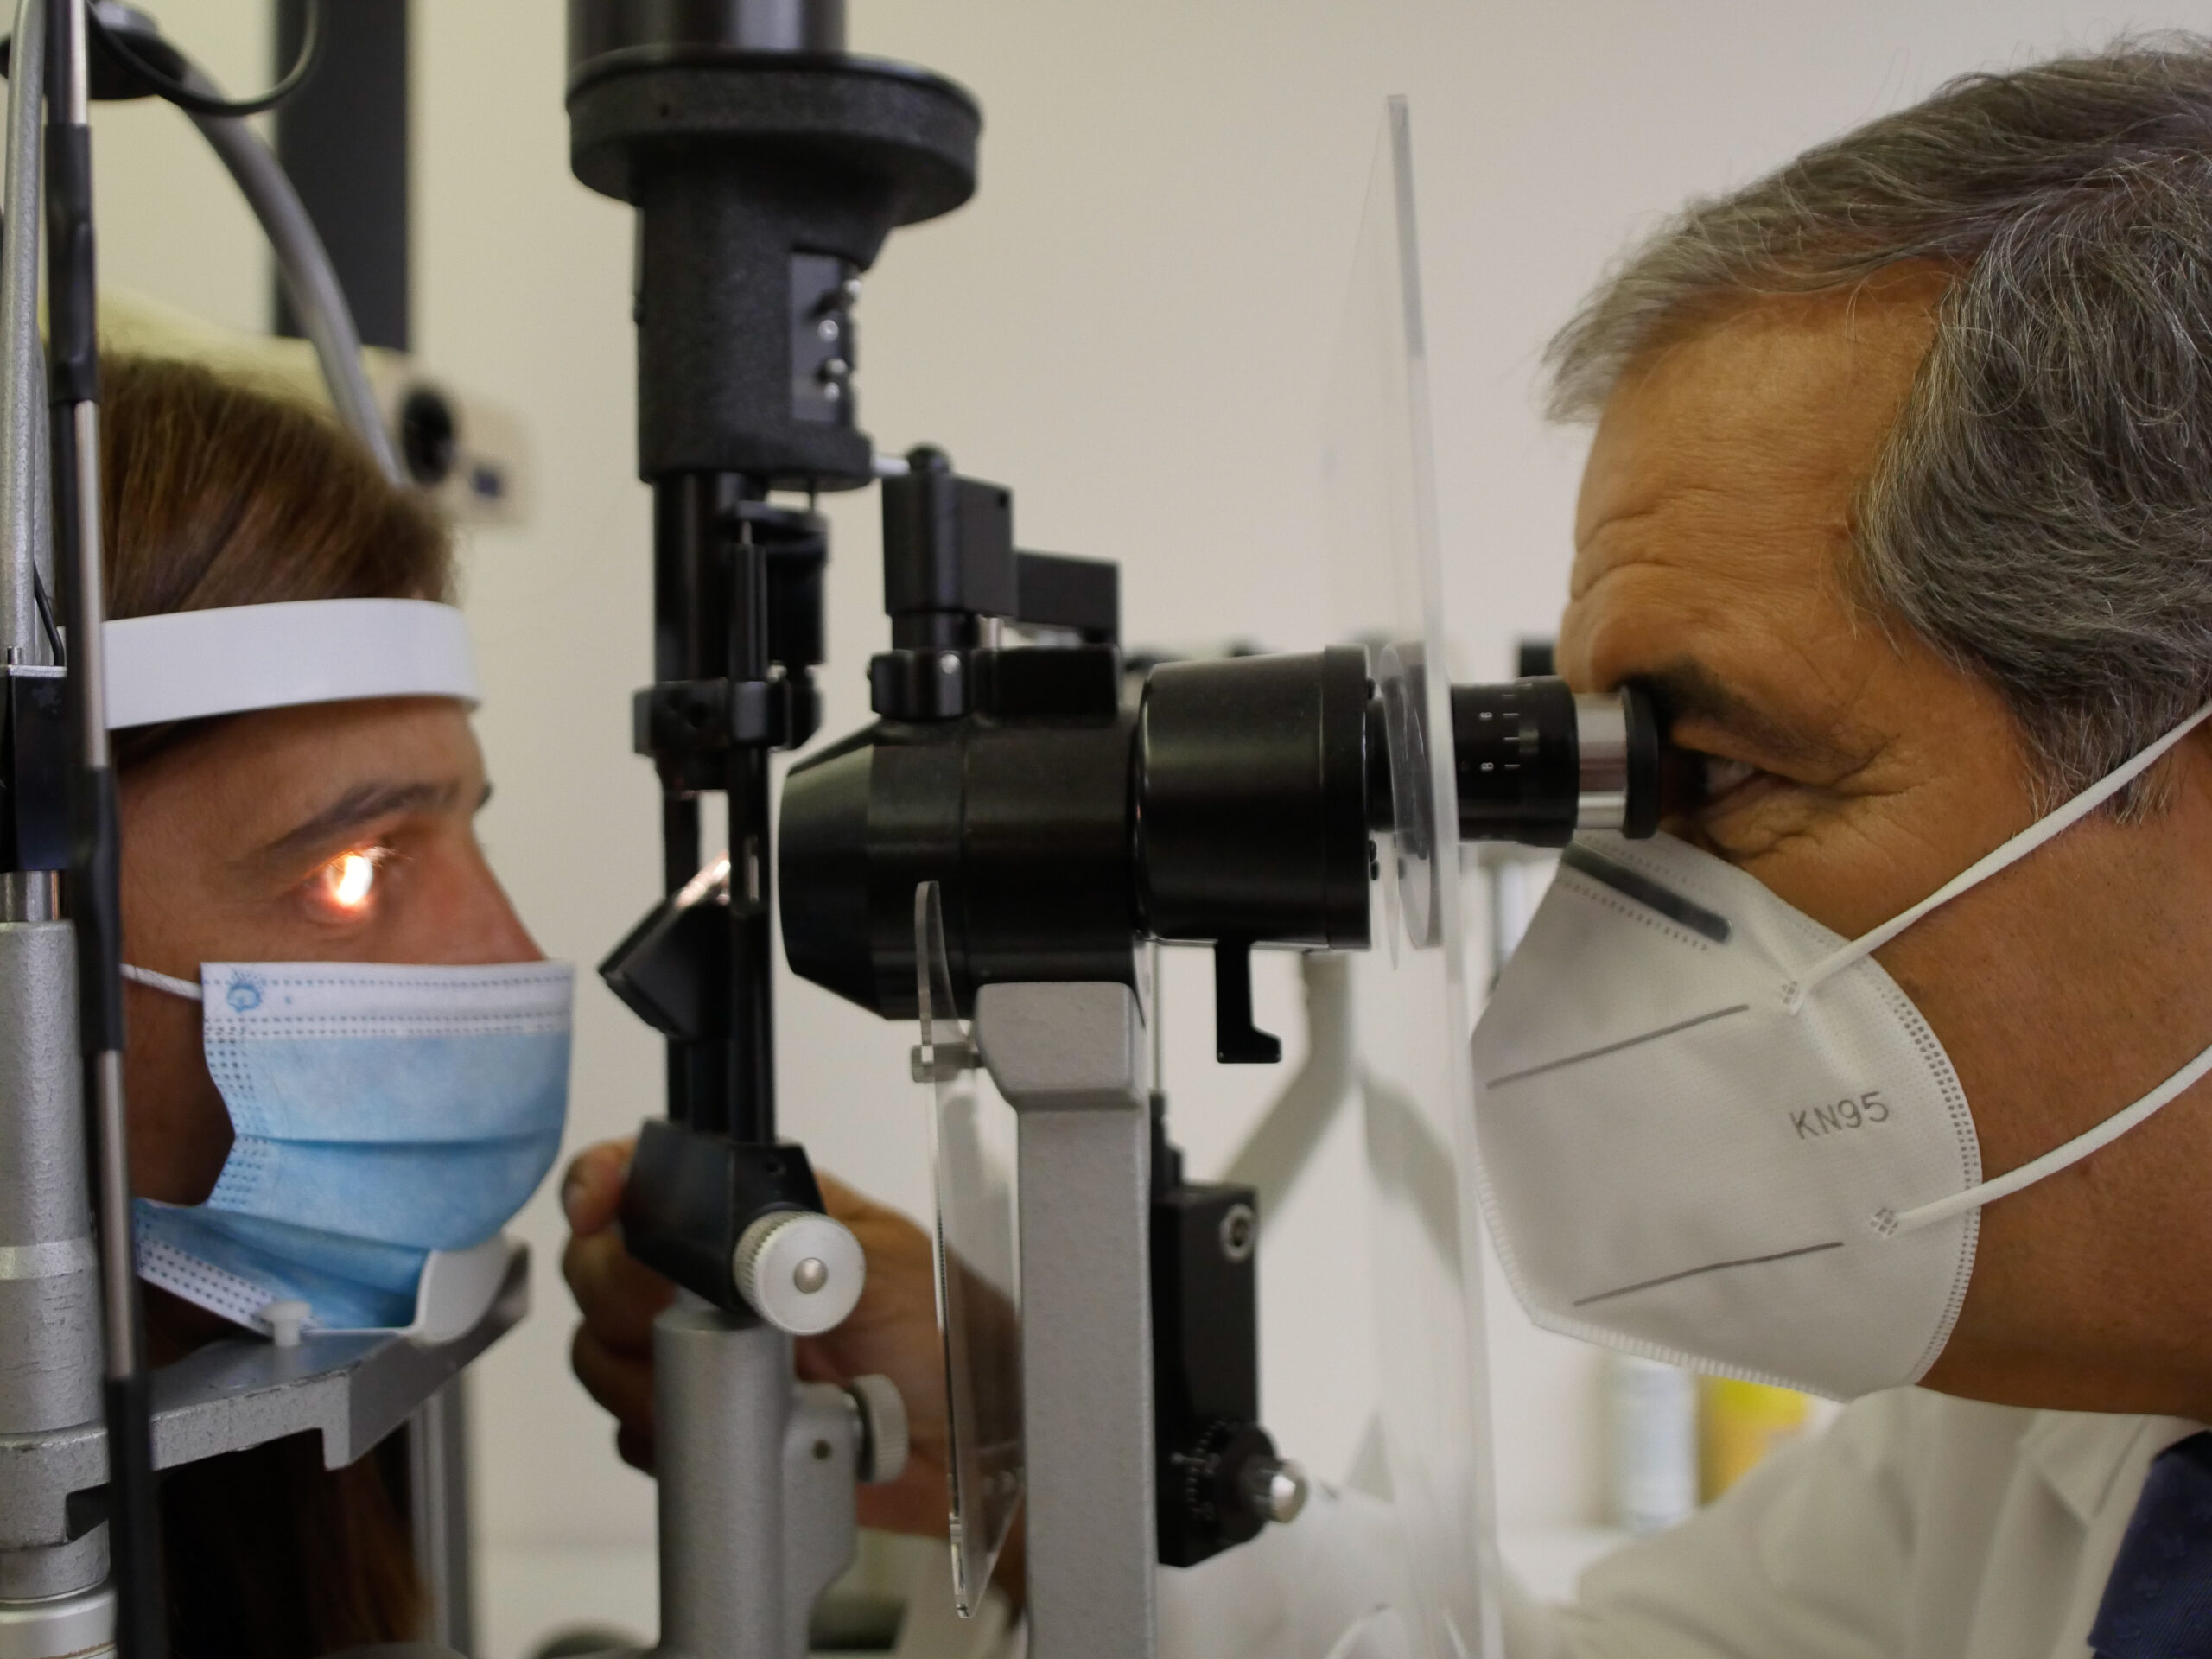 Socieda De Oftalmologia warns against diseases that cause irreversible vision loss and blindness